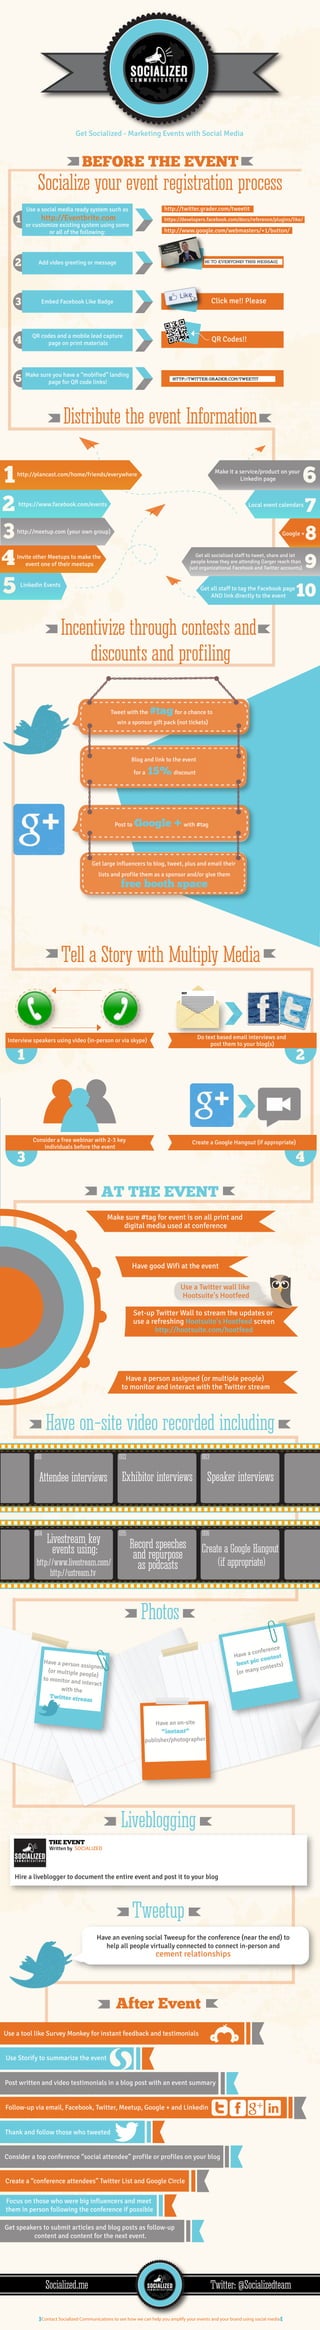 Social Media InfoGraphic - Marketing and Amplifying Events Using Social Media